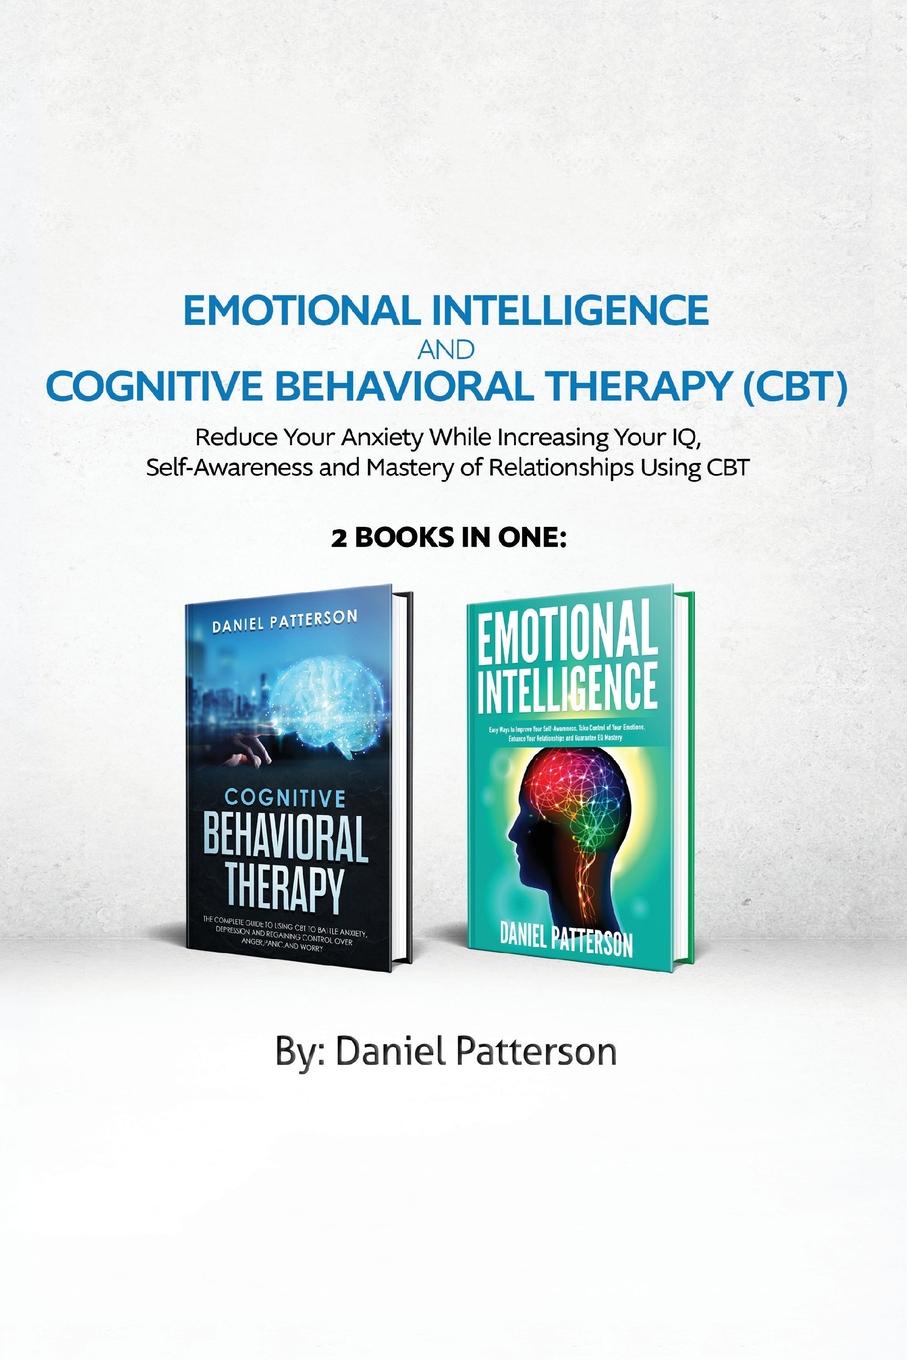 Emotional Intelligence and Cognitive Behavioral Therapy. Reduce Your Anxiety While Increasing Your IQ, Self-Awareness  and Mastery of Relationships Using CBT